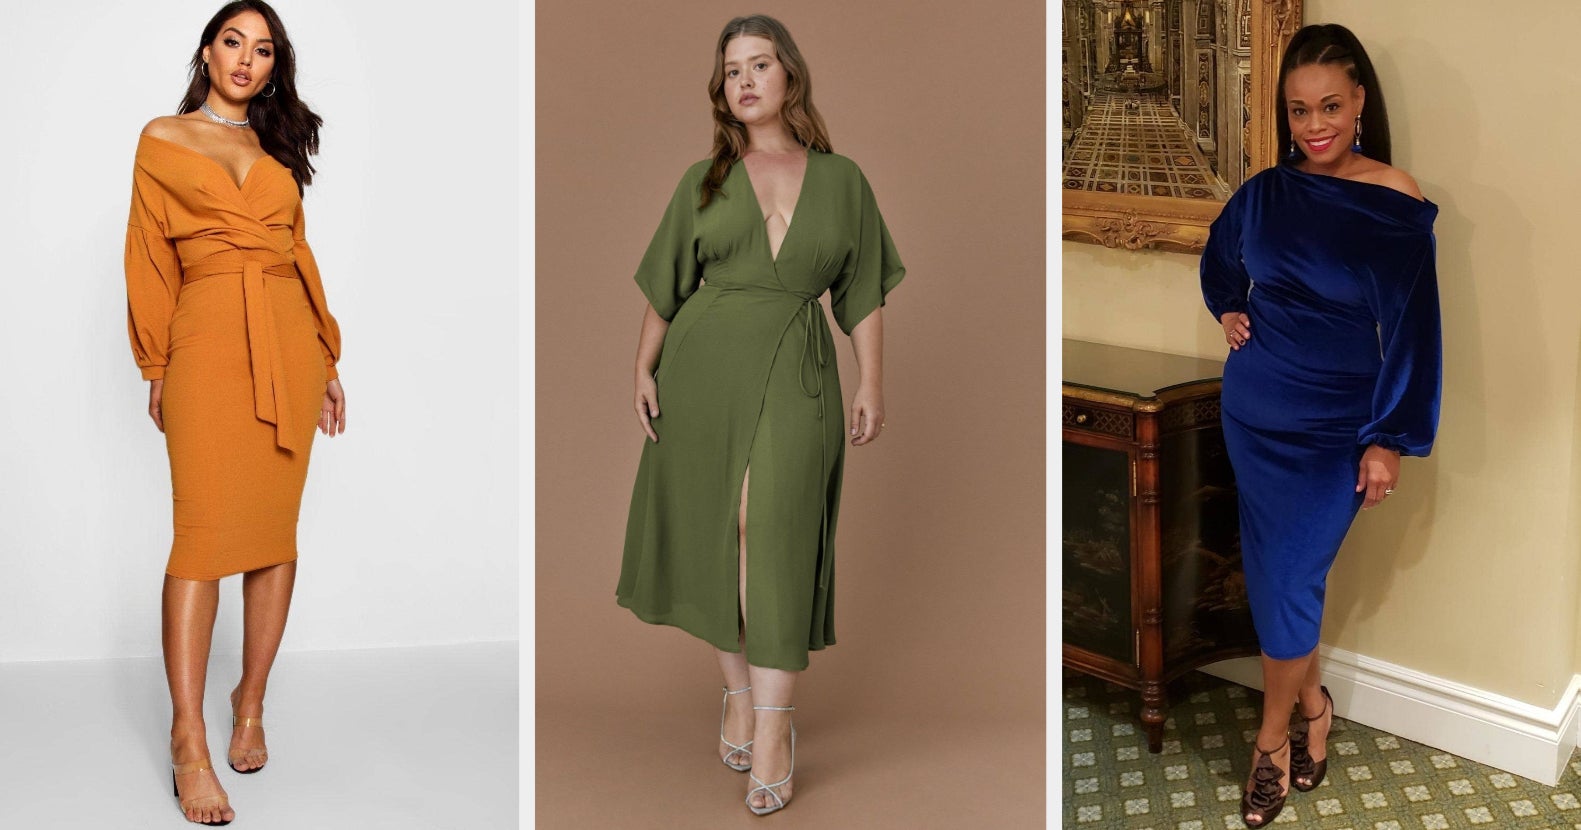 29 Dresses To Wear To A WeddingAnd Then Add To Your Daily Rotation